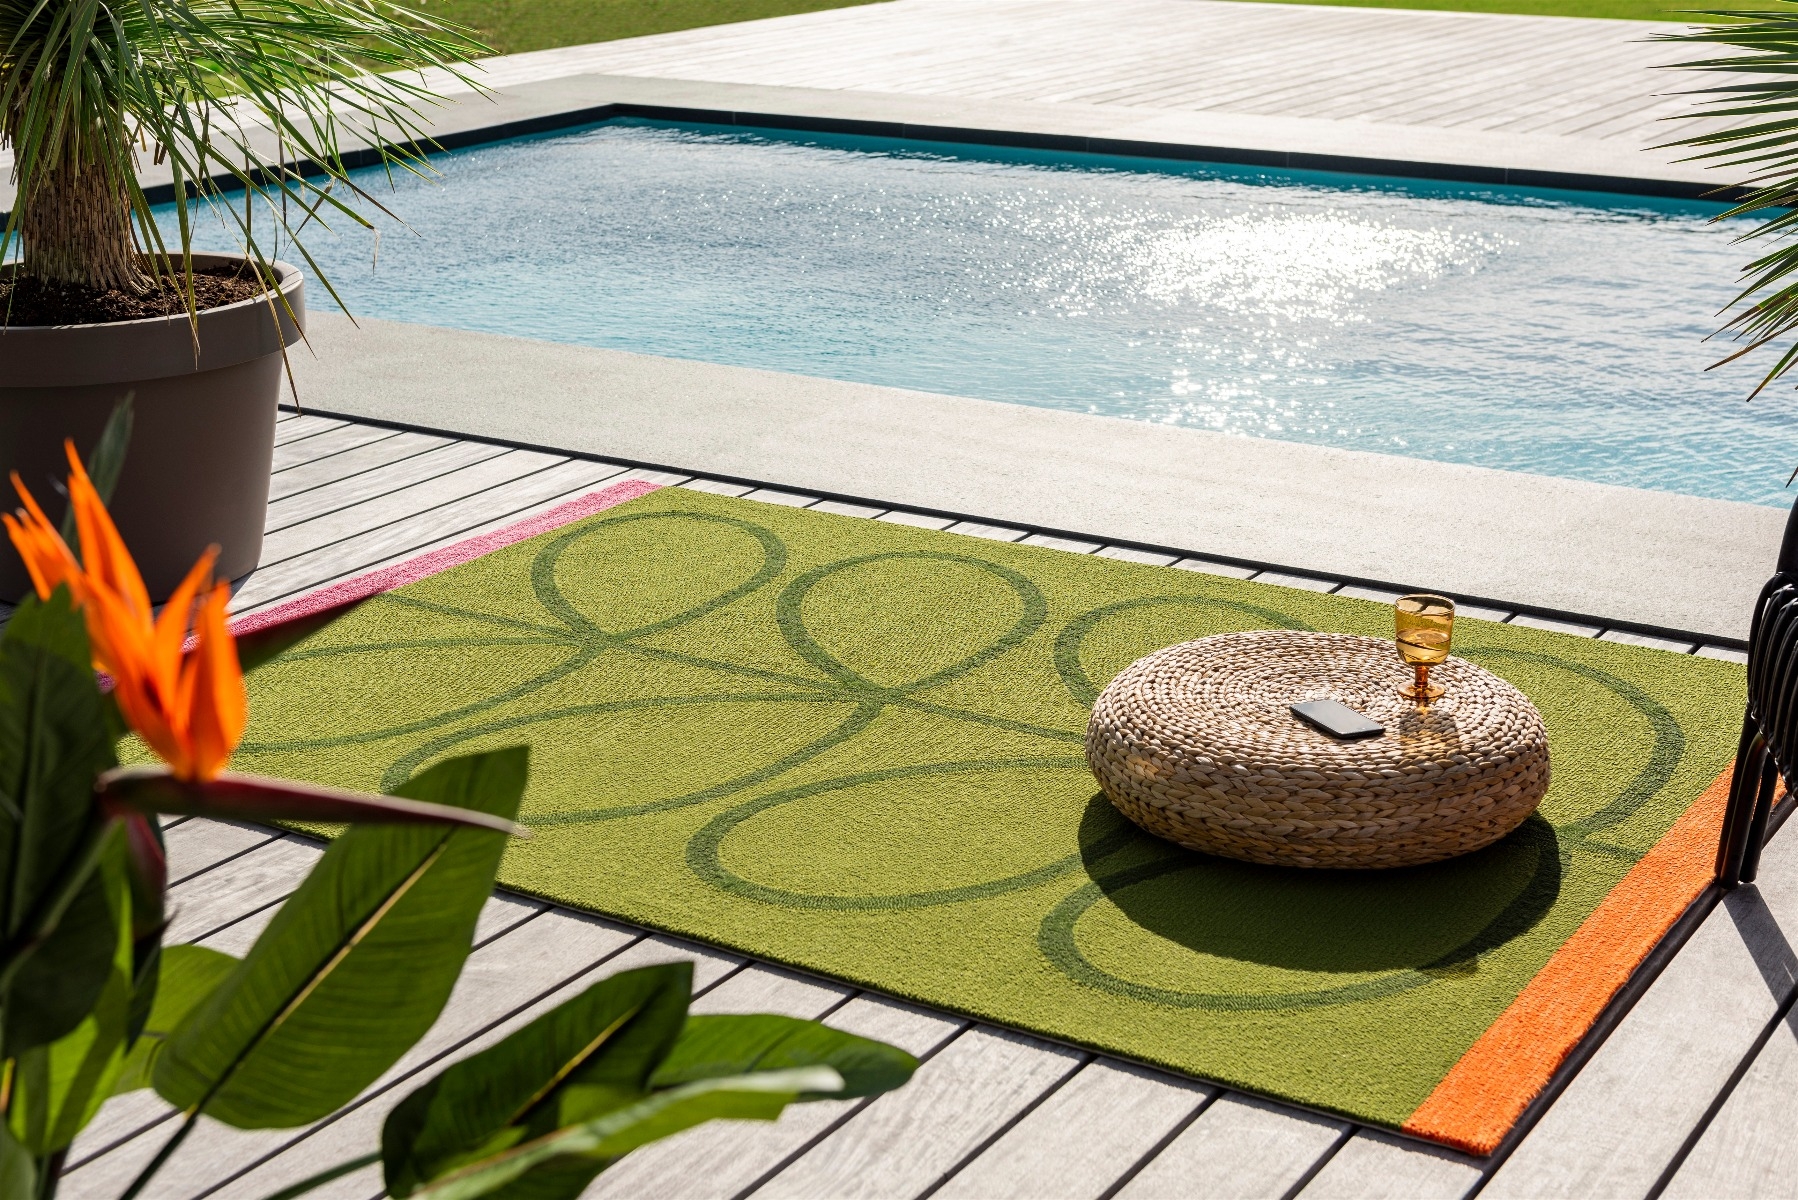 Giant Linear St Seagrass Outdoor 460607 Rug ☞ Size: 140 x 200 cm